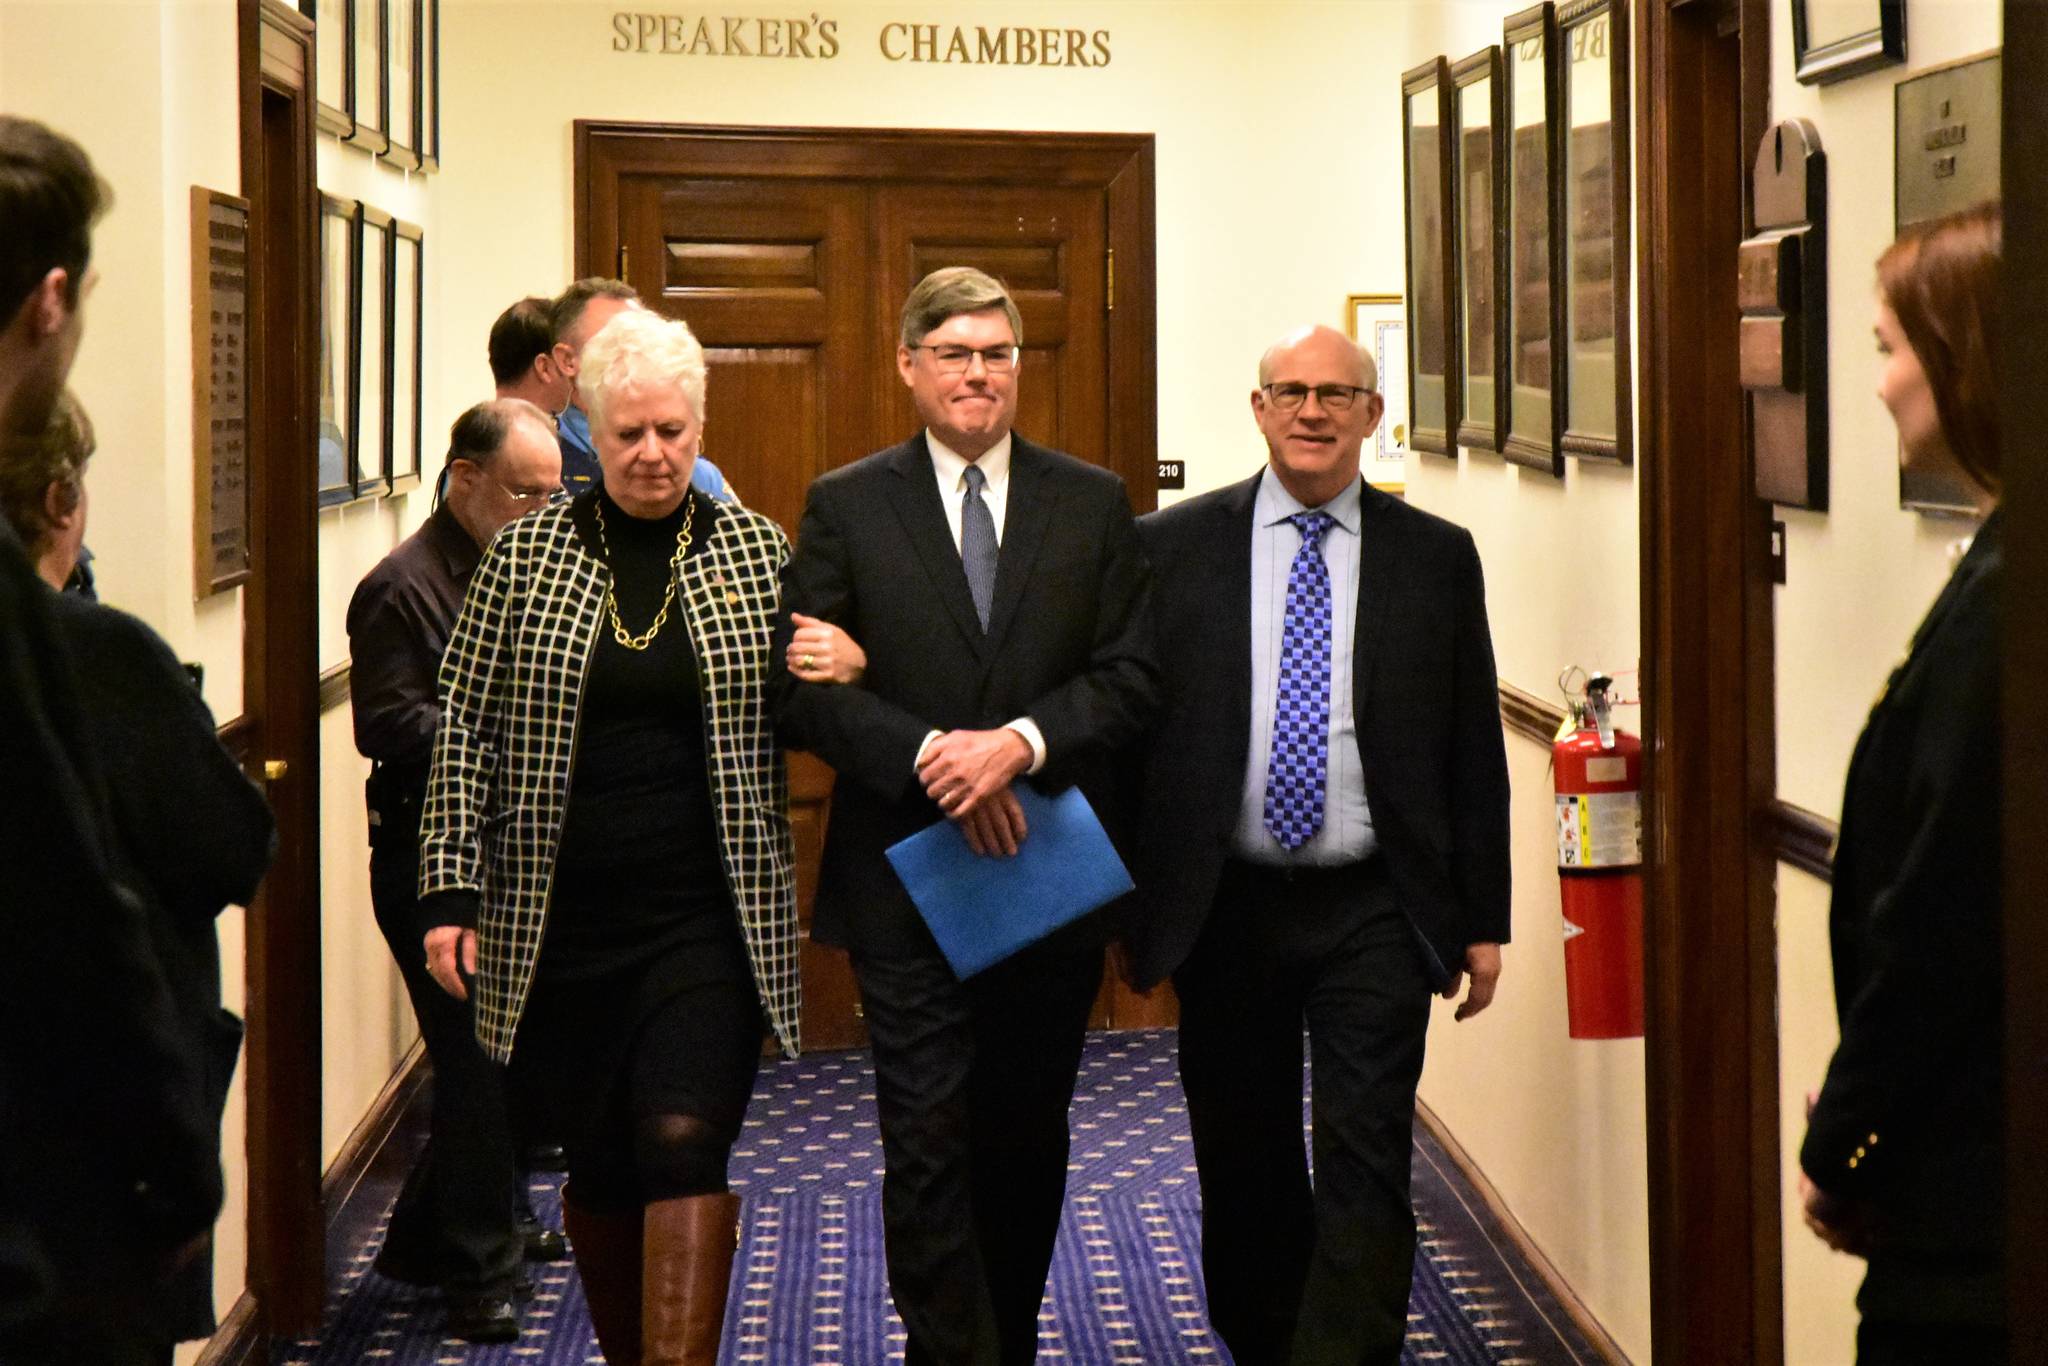 Alaska Supreme Court Chief Justice Joel M. Bolger, center is escorted into the House Chamber by Rep. Louise Stutes, R-Kodiak, and Sen. John Coghill, R-North Pole, on Wednesday, Feb. 12, 2020. (Peter Segall | Juneau Empire)